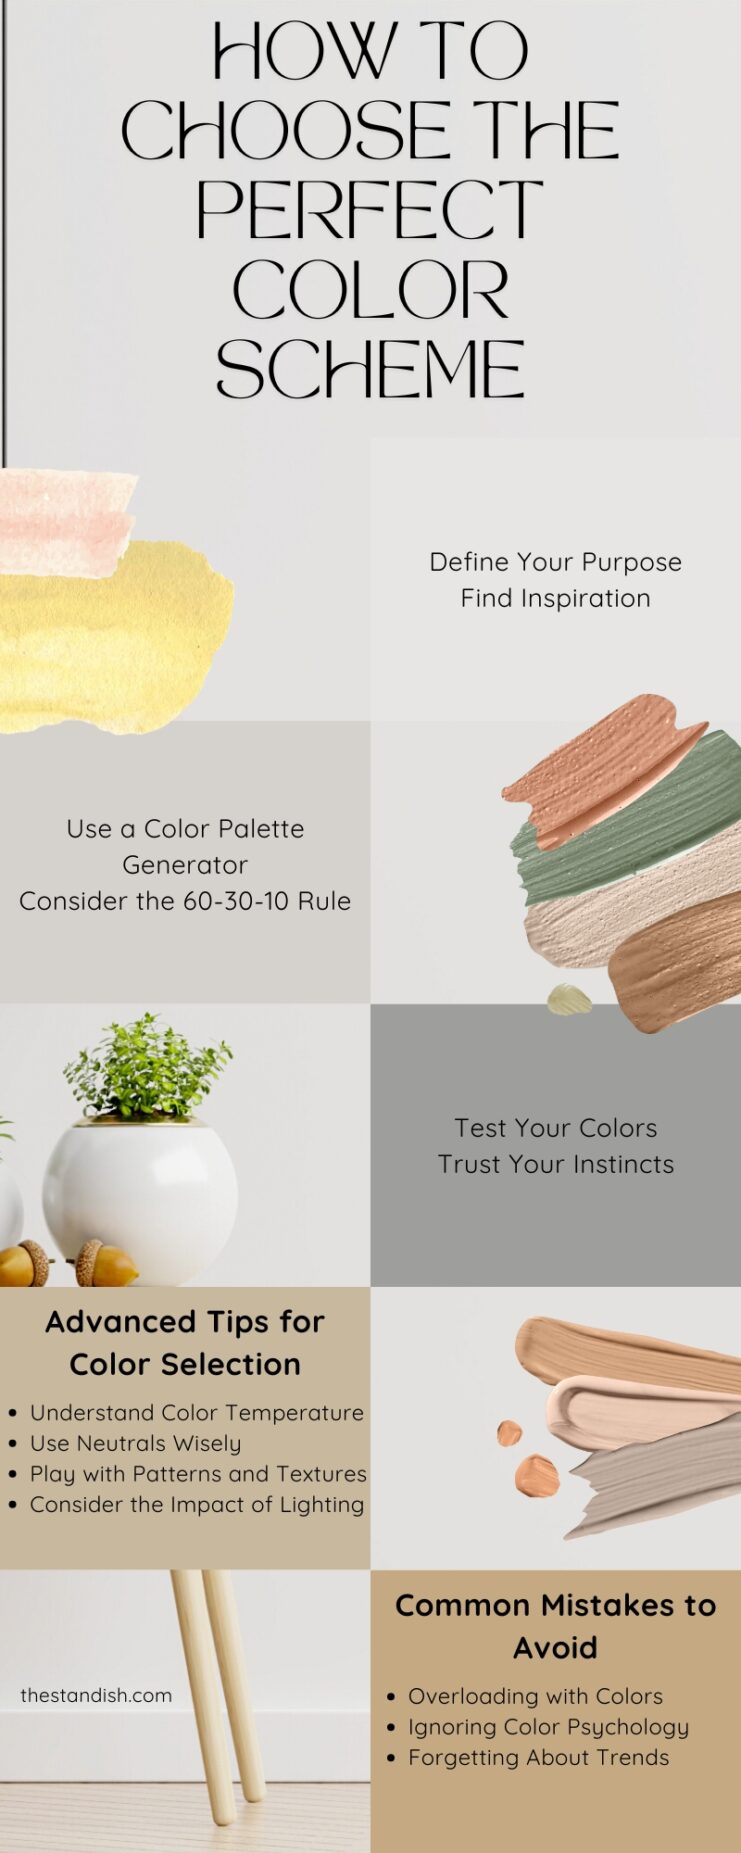 How To Choose the Perfect Color Scheme Infographic